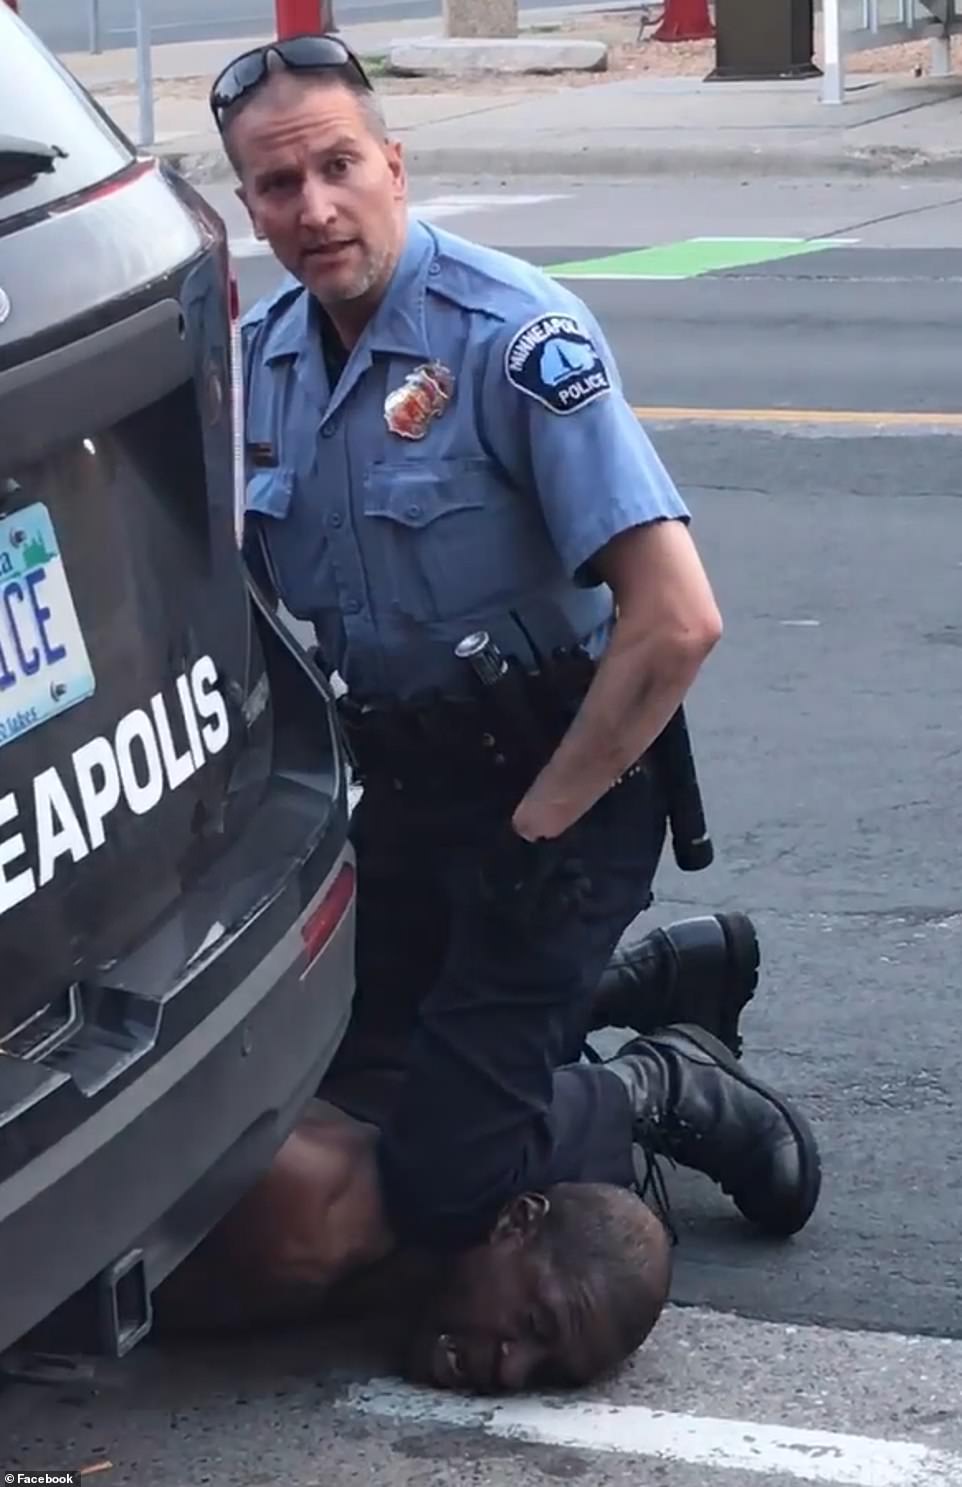 It also shows how Floyd resisted as the cops tried to force him into the back of the car telling them he suffers from claustrophobia and anxiety and how Officer Derek Chauvin (pictured) knelt on his neck for nearly nine minutes, leading to his death, ignoring Floyd